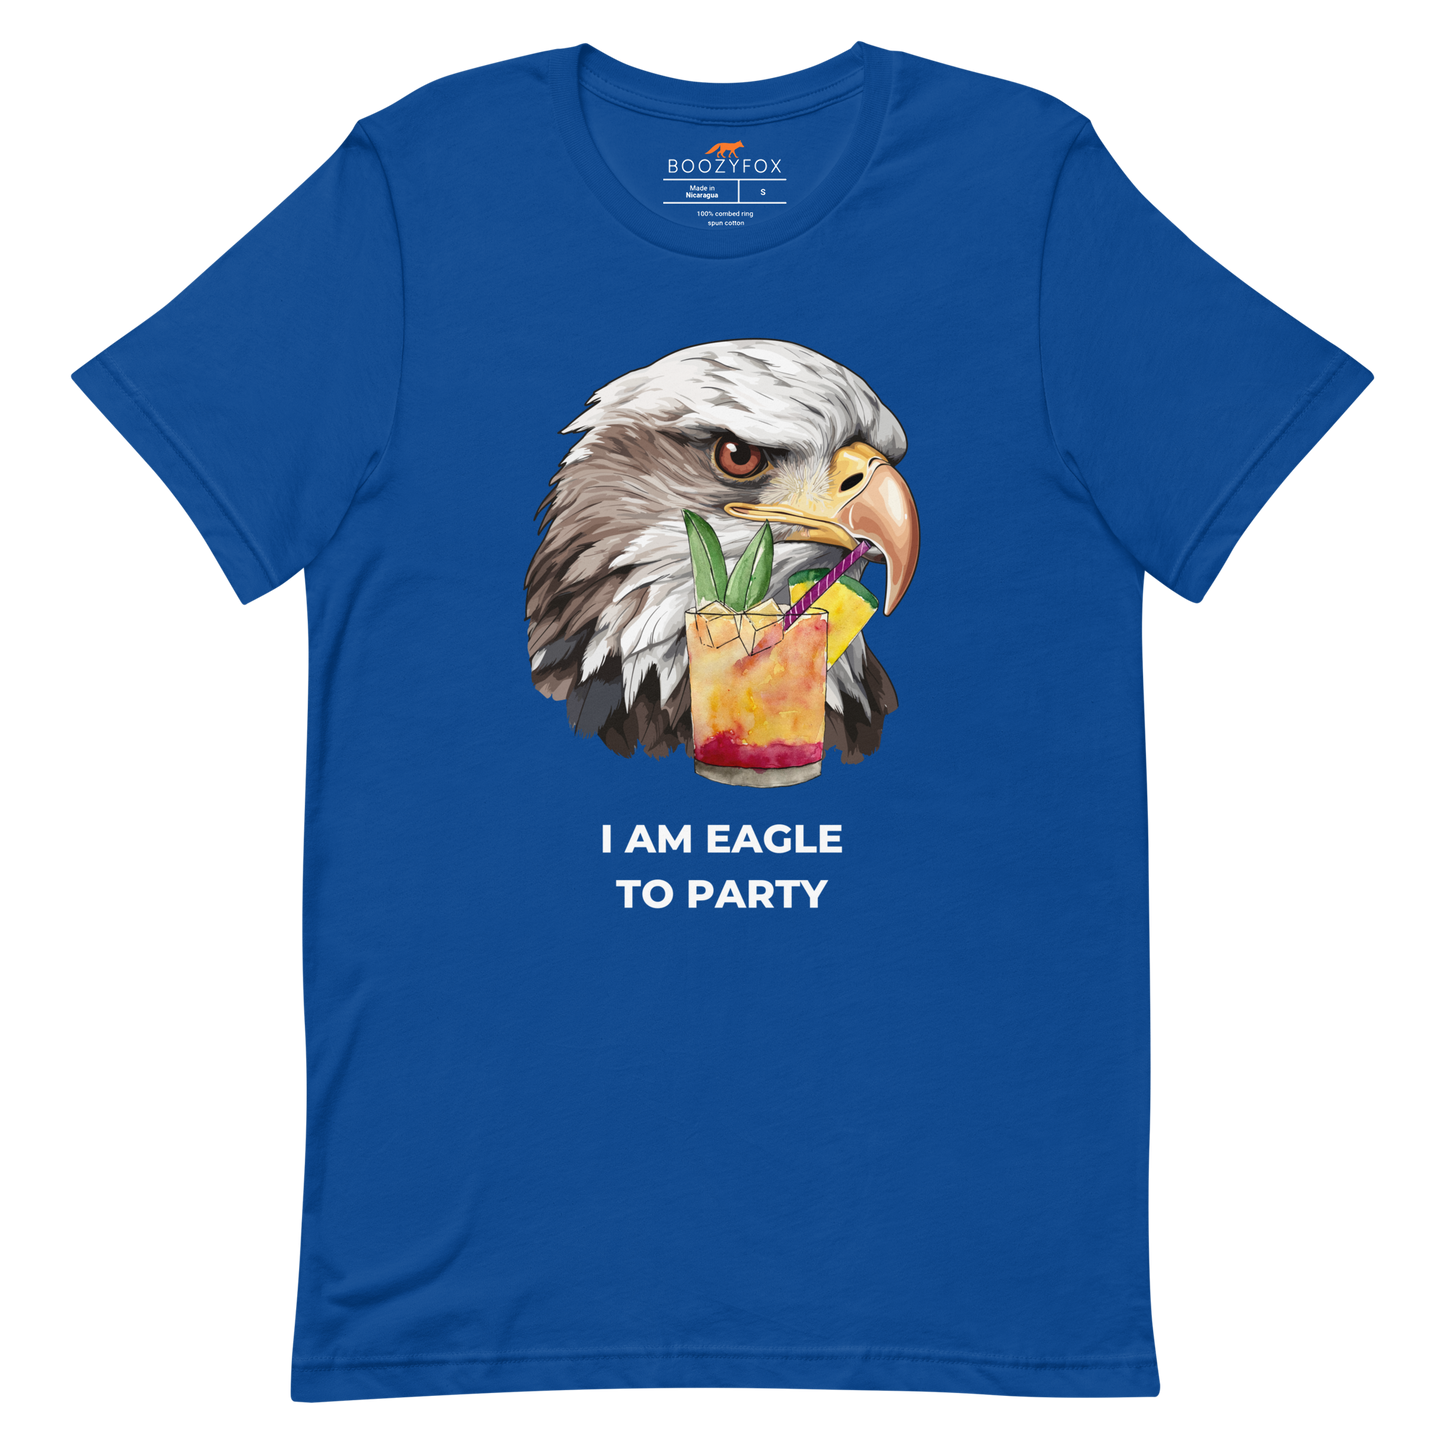 True Royal Blue Premium Eagle T-Shirt featuring an eye-catching I Am Eagle to Party graphic on the chest - Funny Graphic Eagle Tees - Boozy Fox